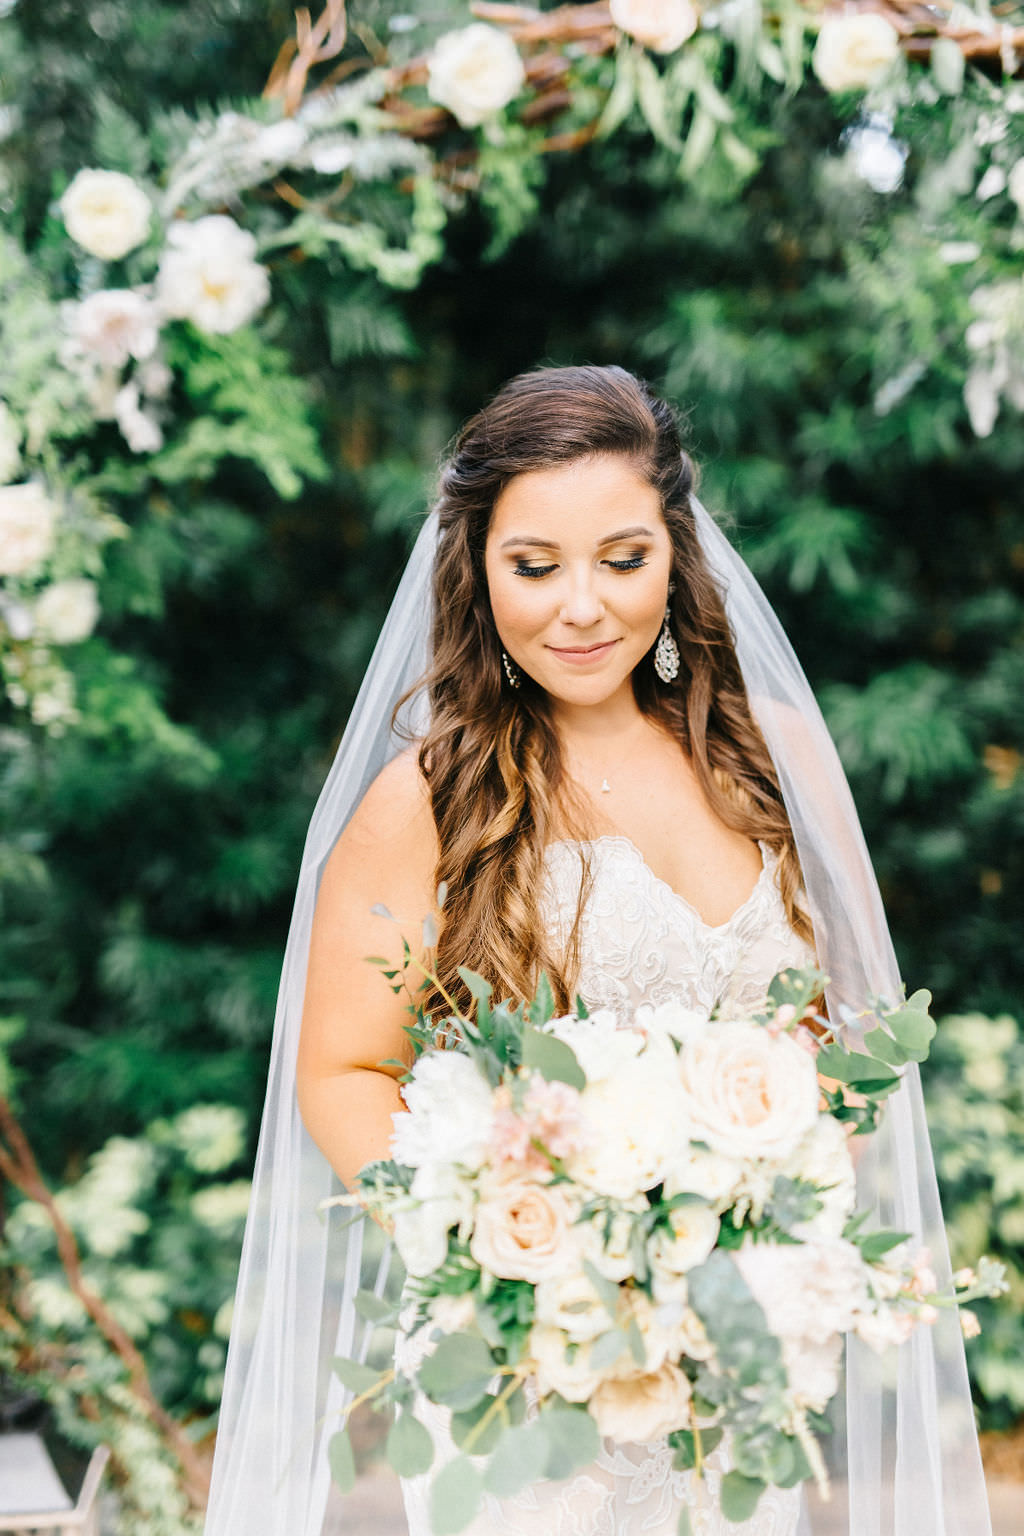 Romantic Tampa Bay Bride Beauty Wedding Portrait, Soft Bridal Organic Garden Bouquet with Ivory Roses, Bush Pink Flowers, Sage Green Leaves, Natural Hair and Makeup